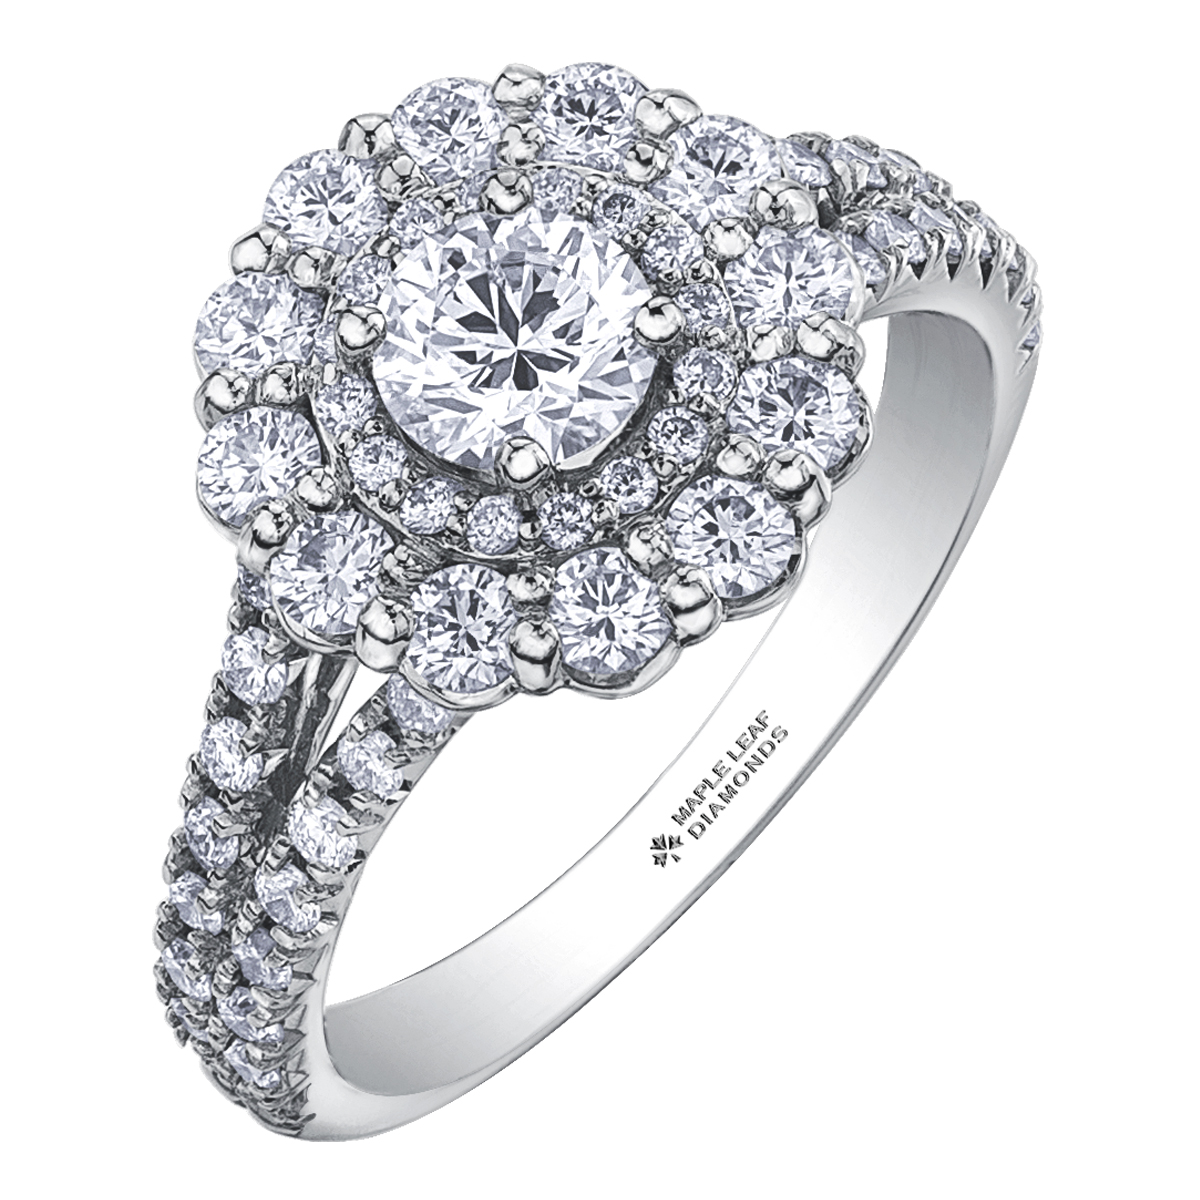 Diamond Engagment Cluster Rings Online at Berry's Jewellers.